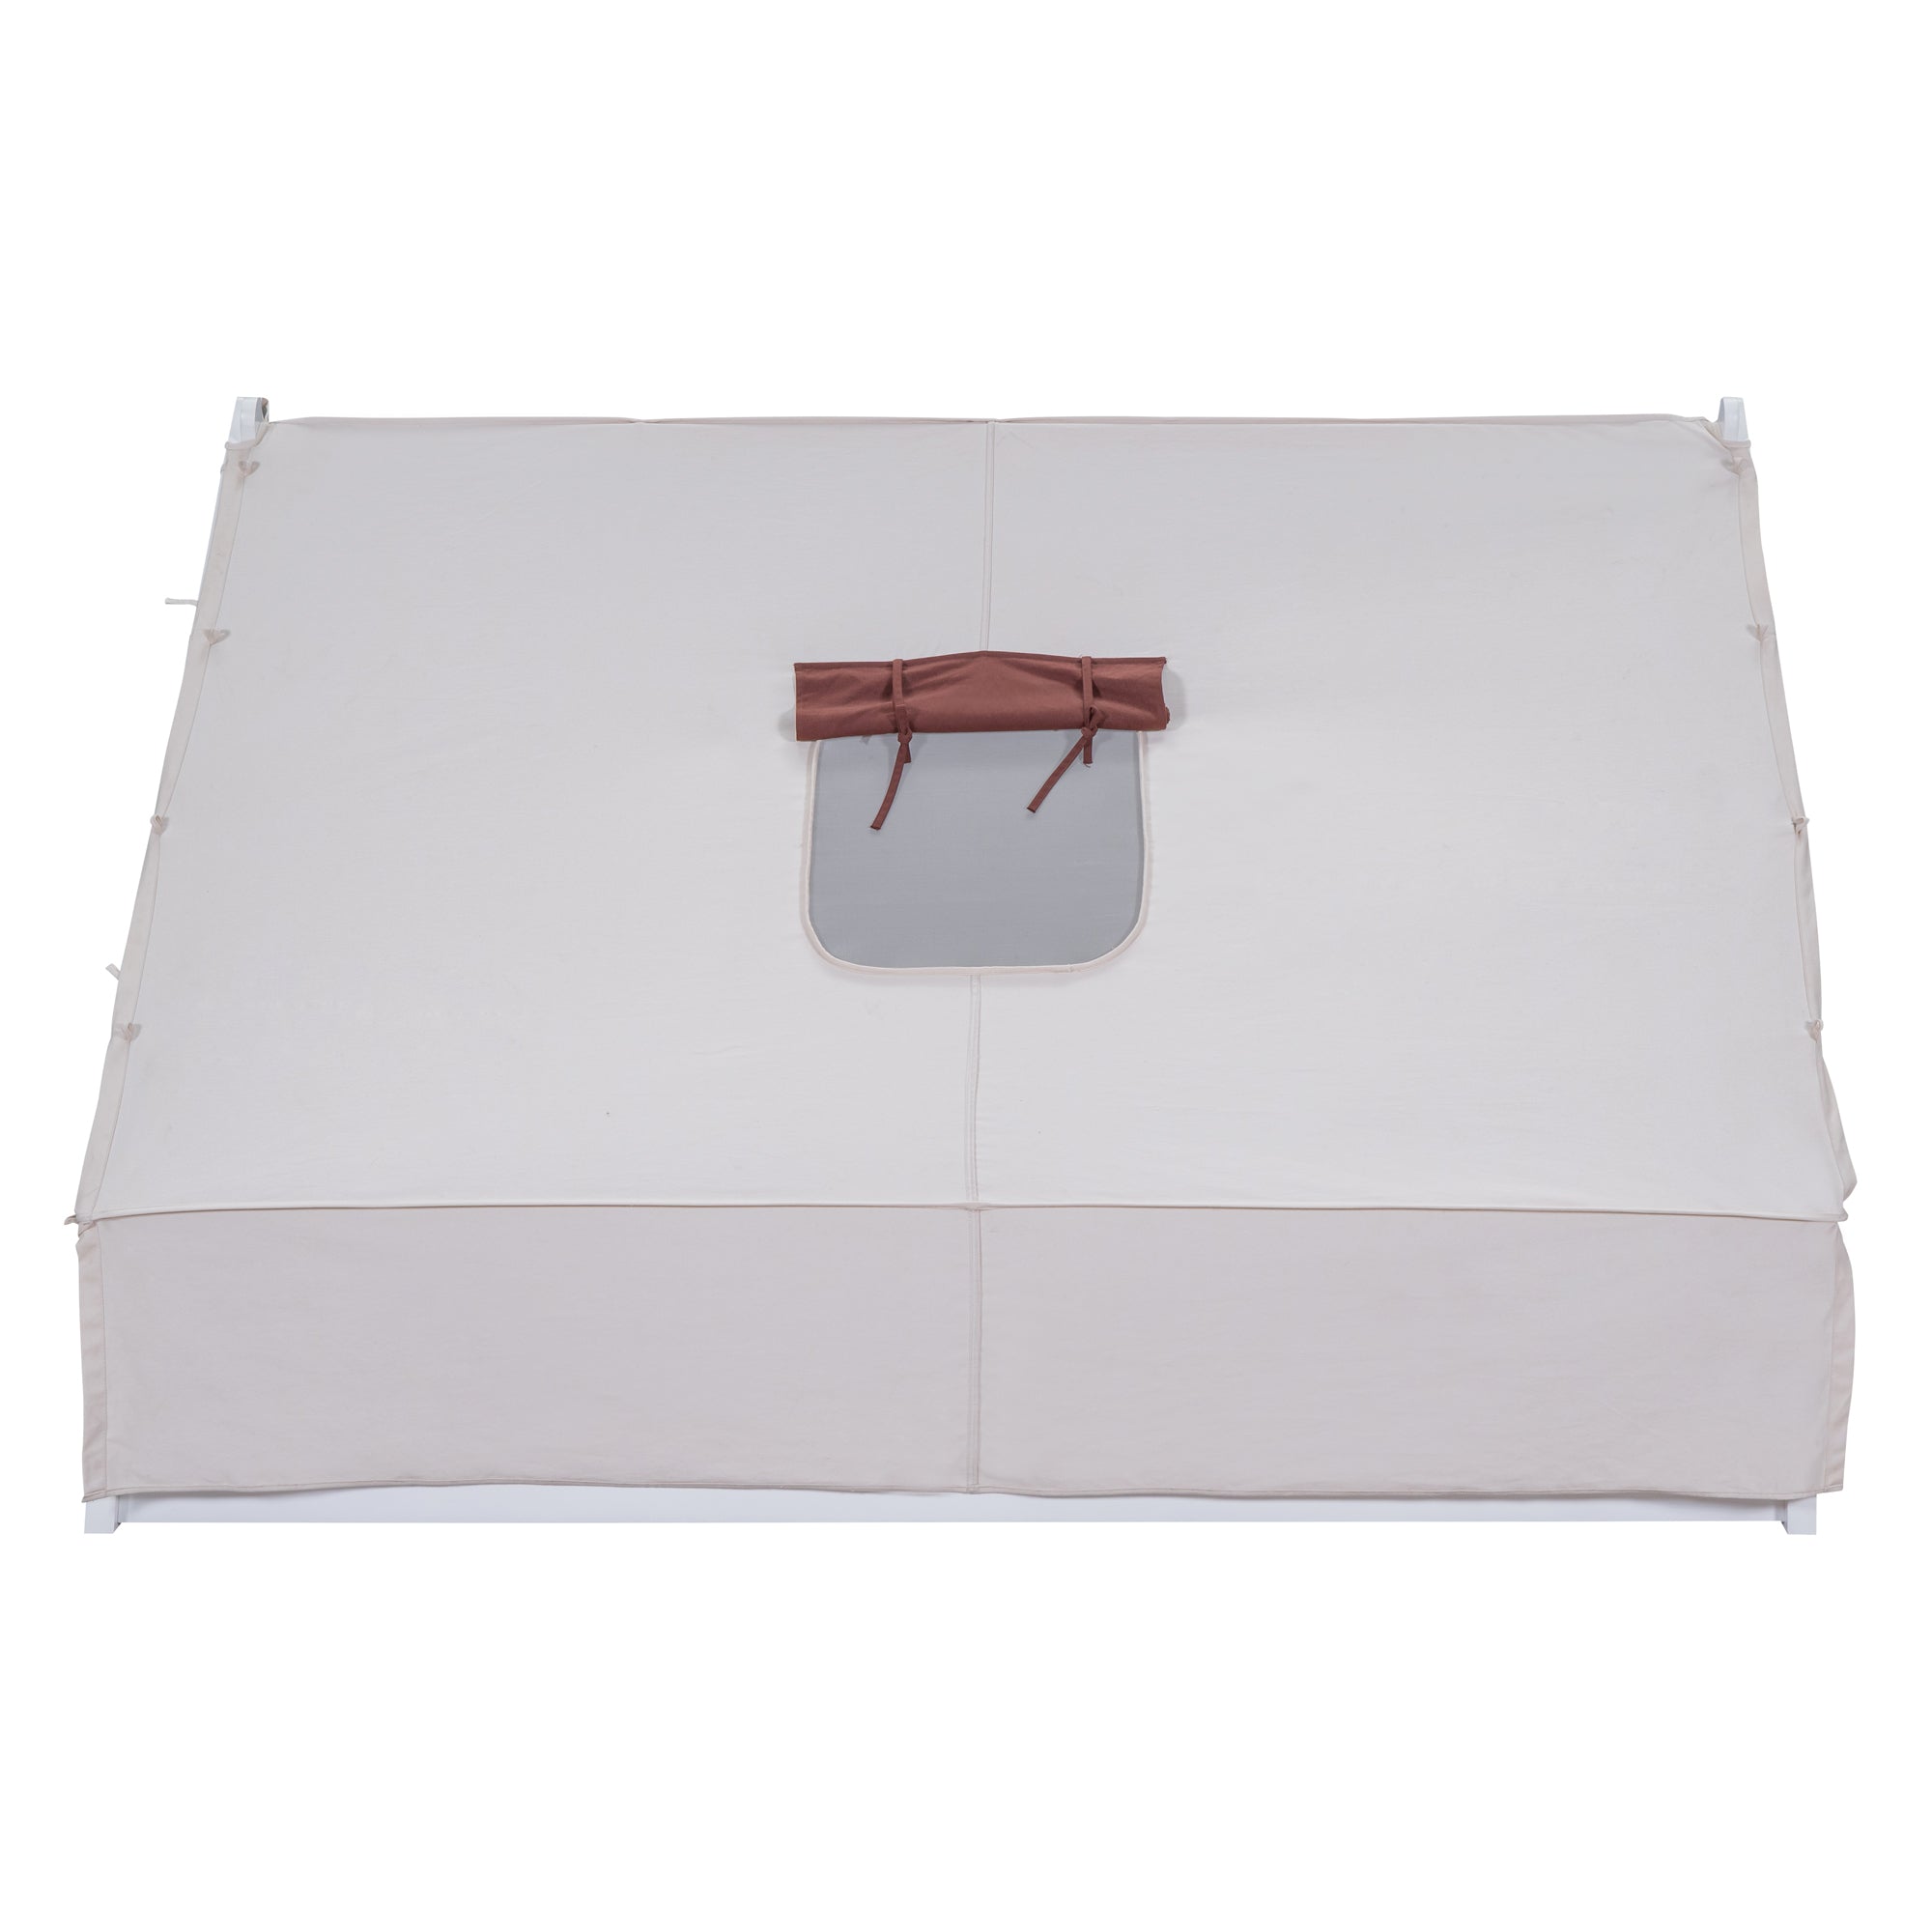 Bellemave® Full Size House Tent Bed with Fabric,Fence and Roof Bellemave®